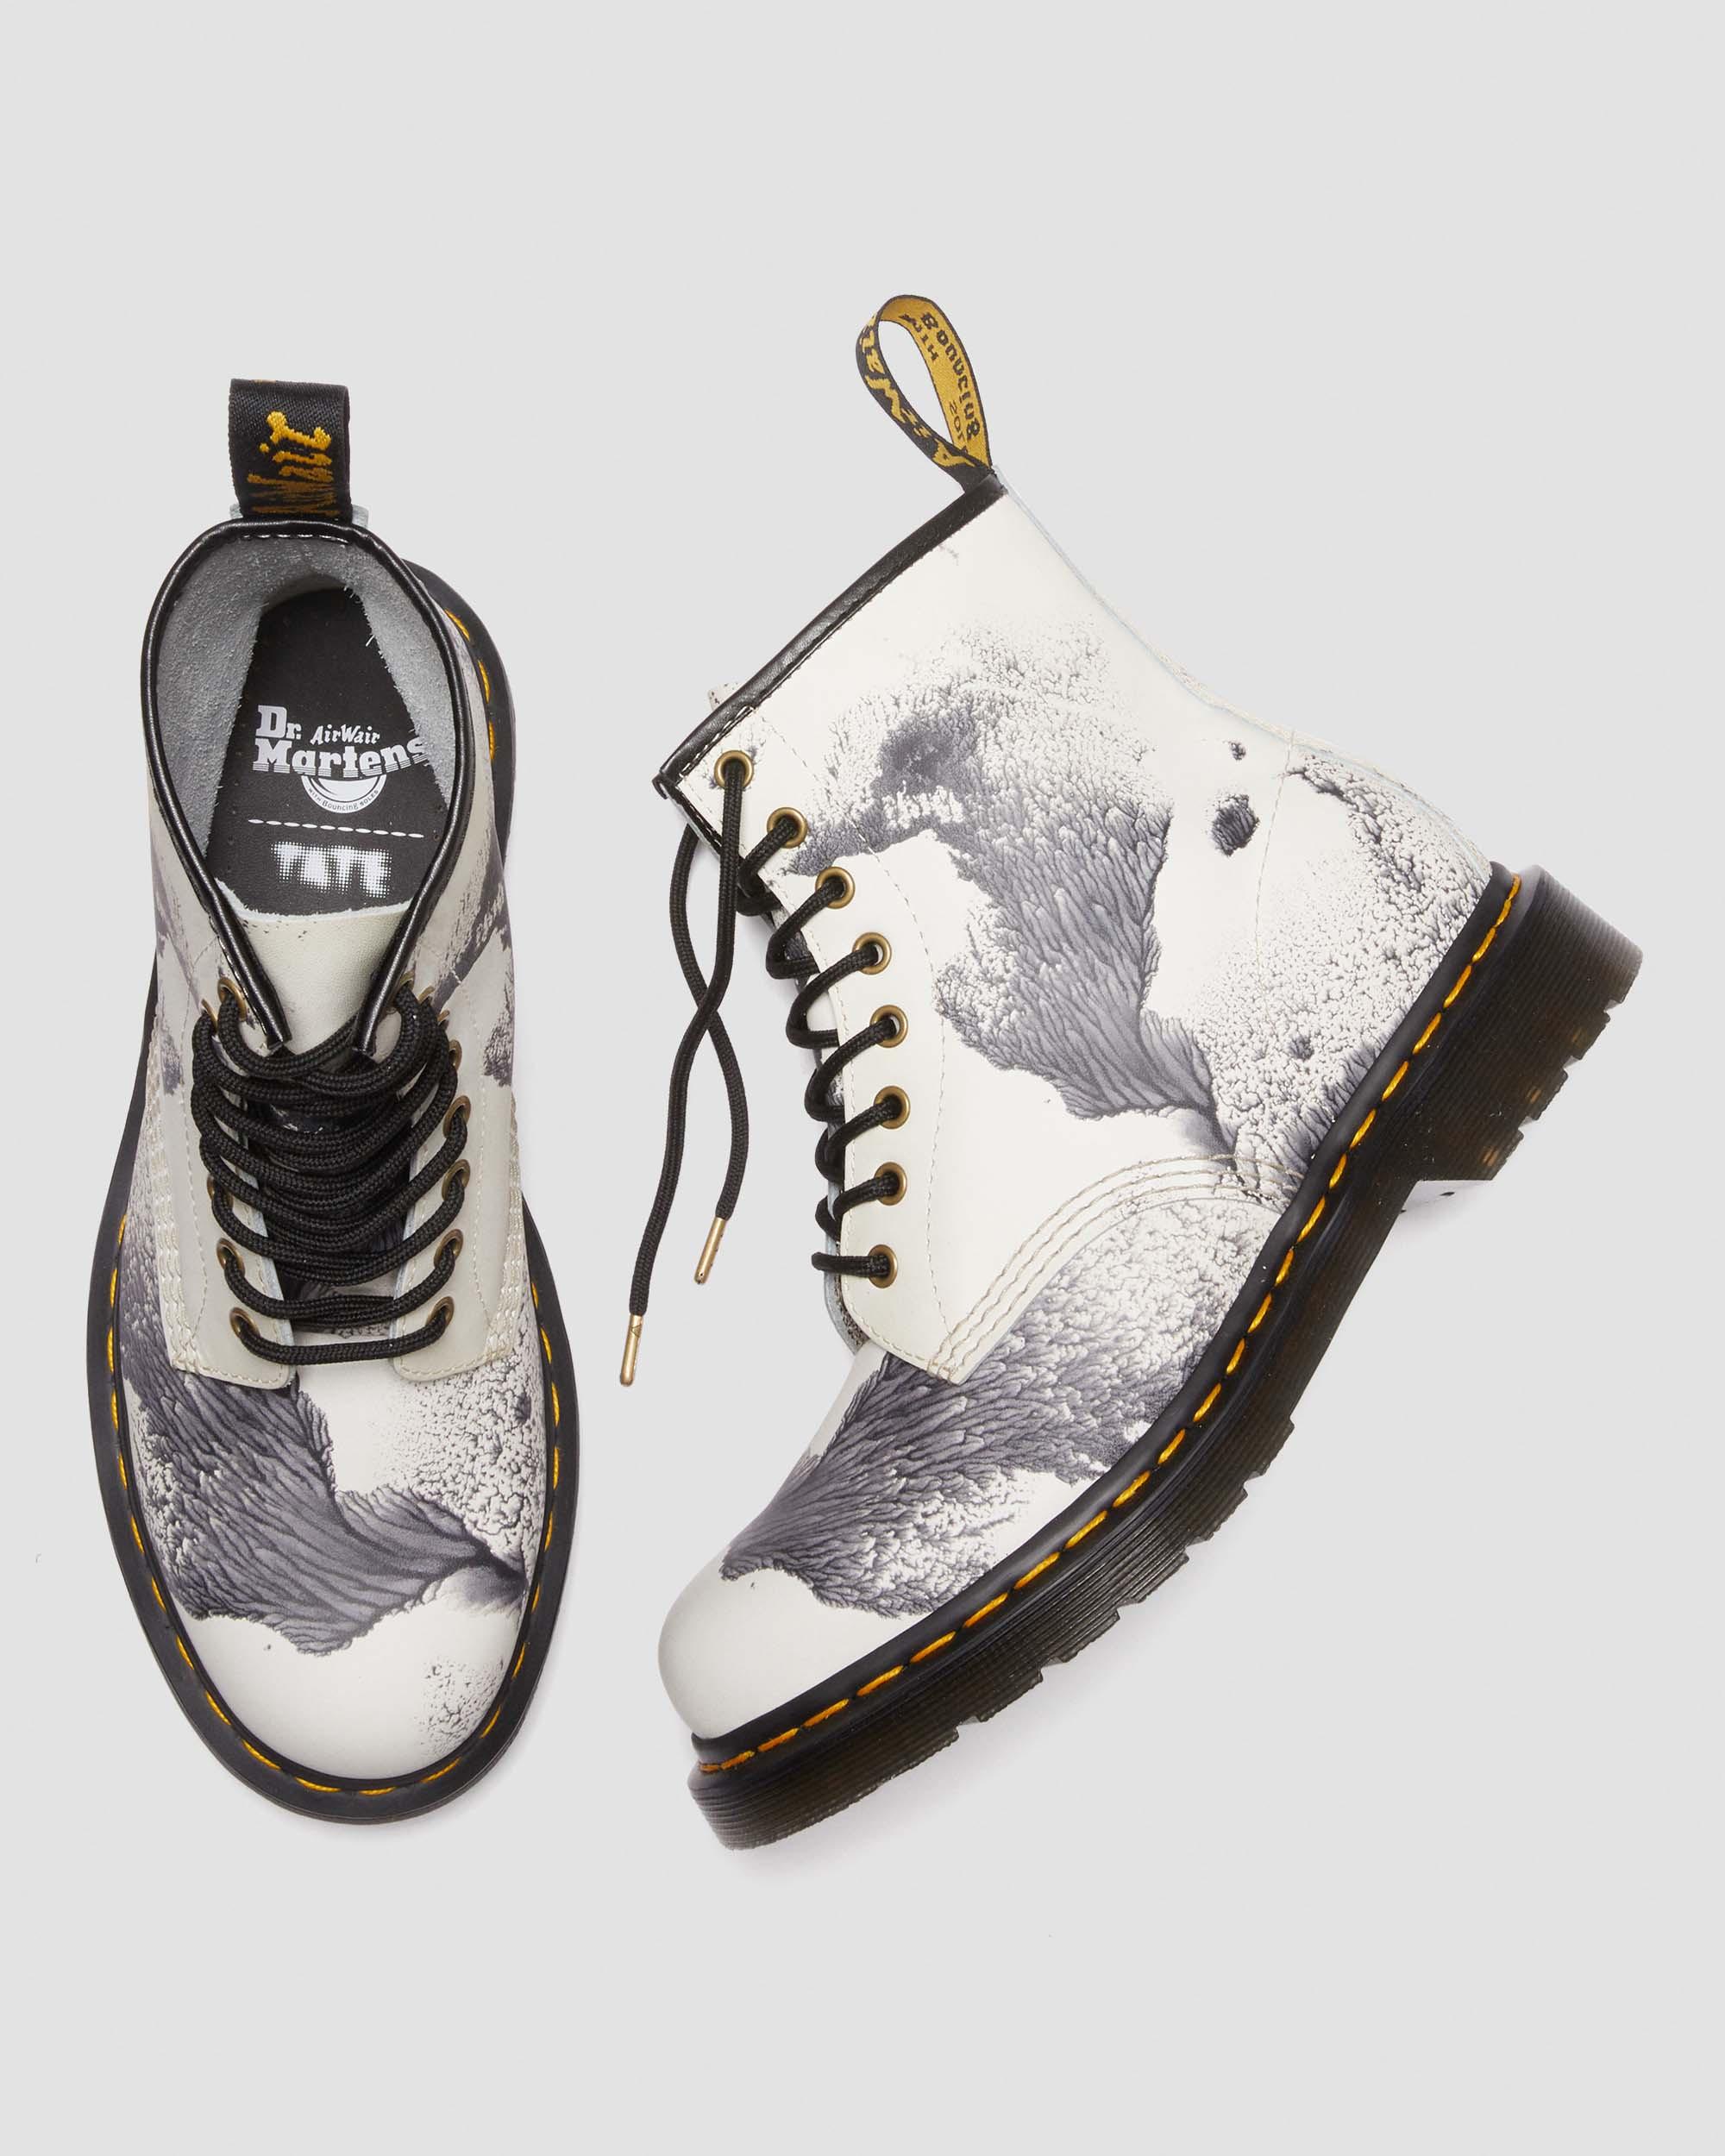 Shop Dr. Martens' 1460 Tate 'decalcomania' Backhand Leather Lace Up Boots In Black,multi,printed